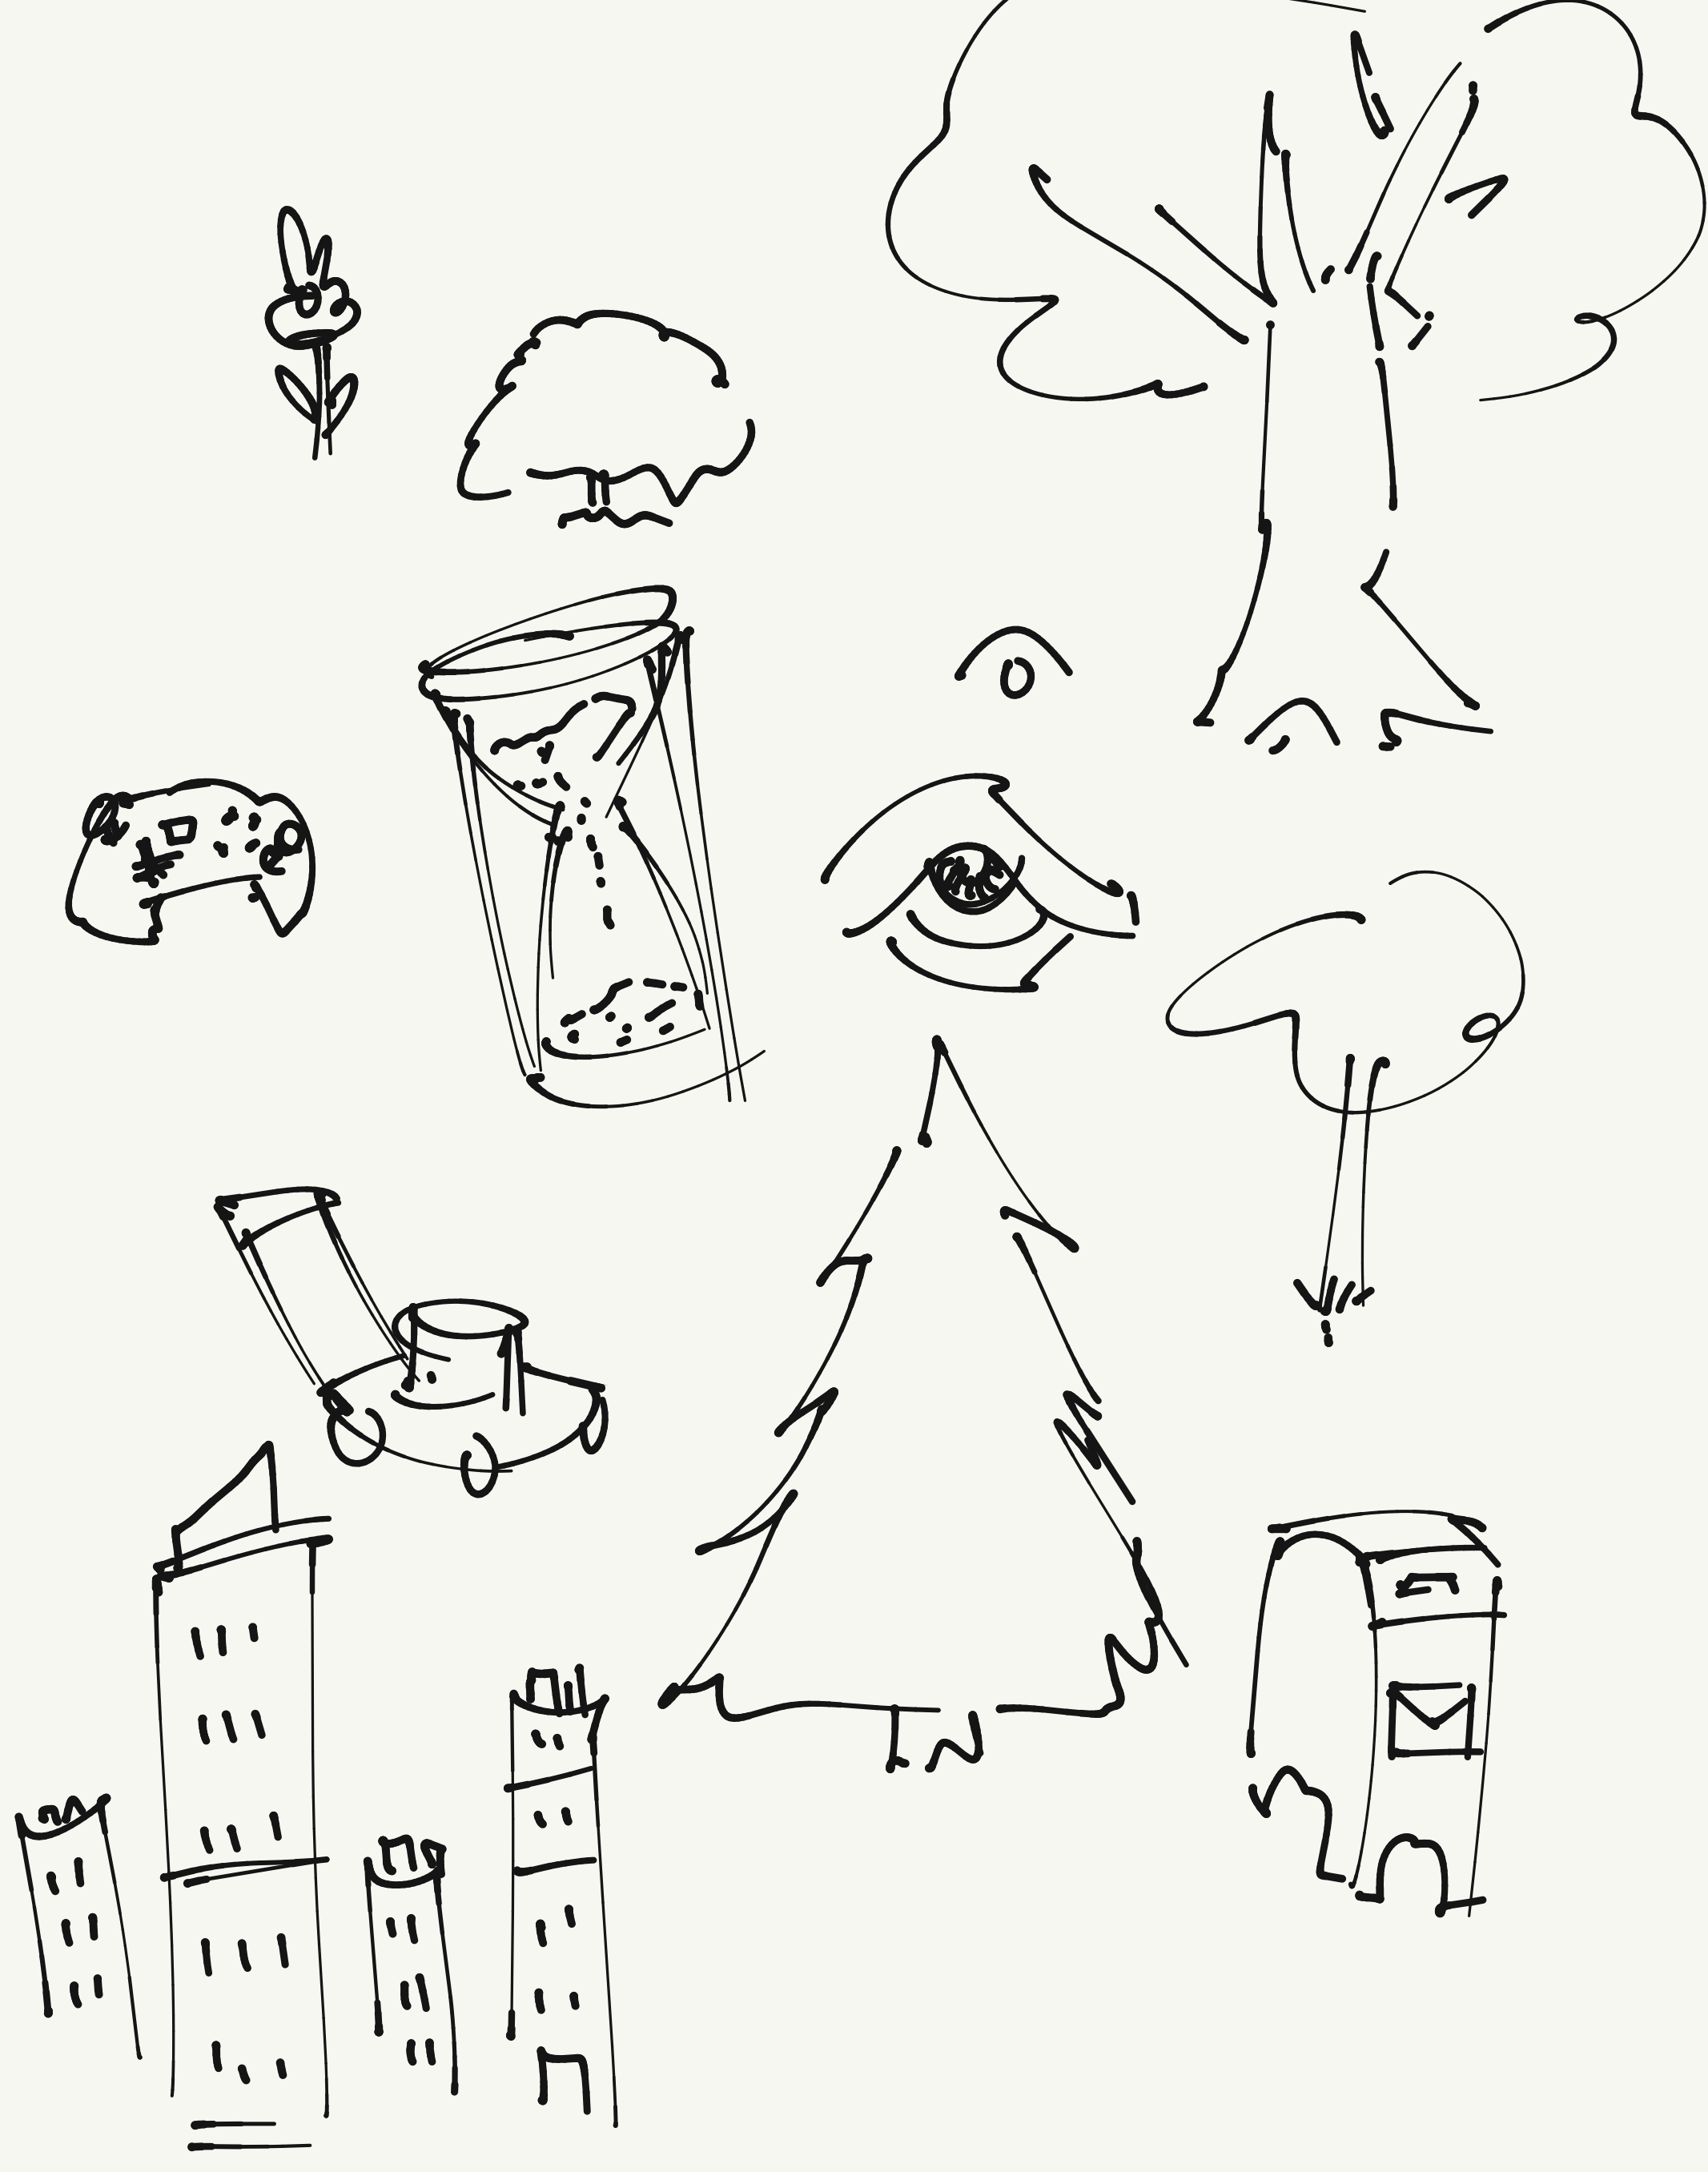 Doodle Catalog 3 - lots of sketches drawings quick visual storytelling note taking examples and ideas 3.png